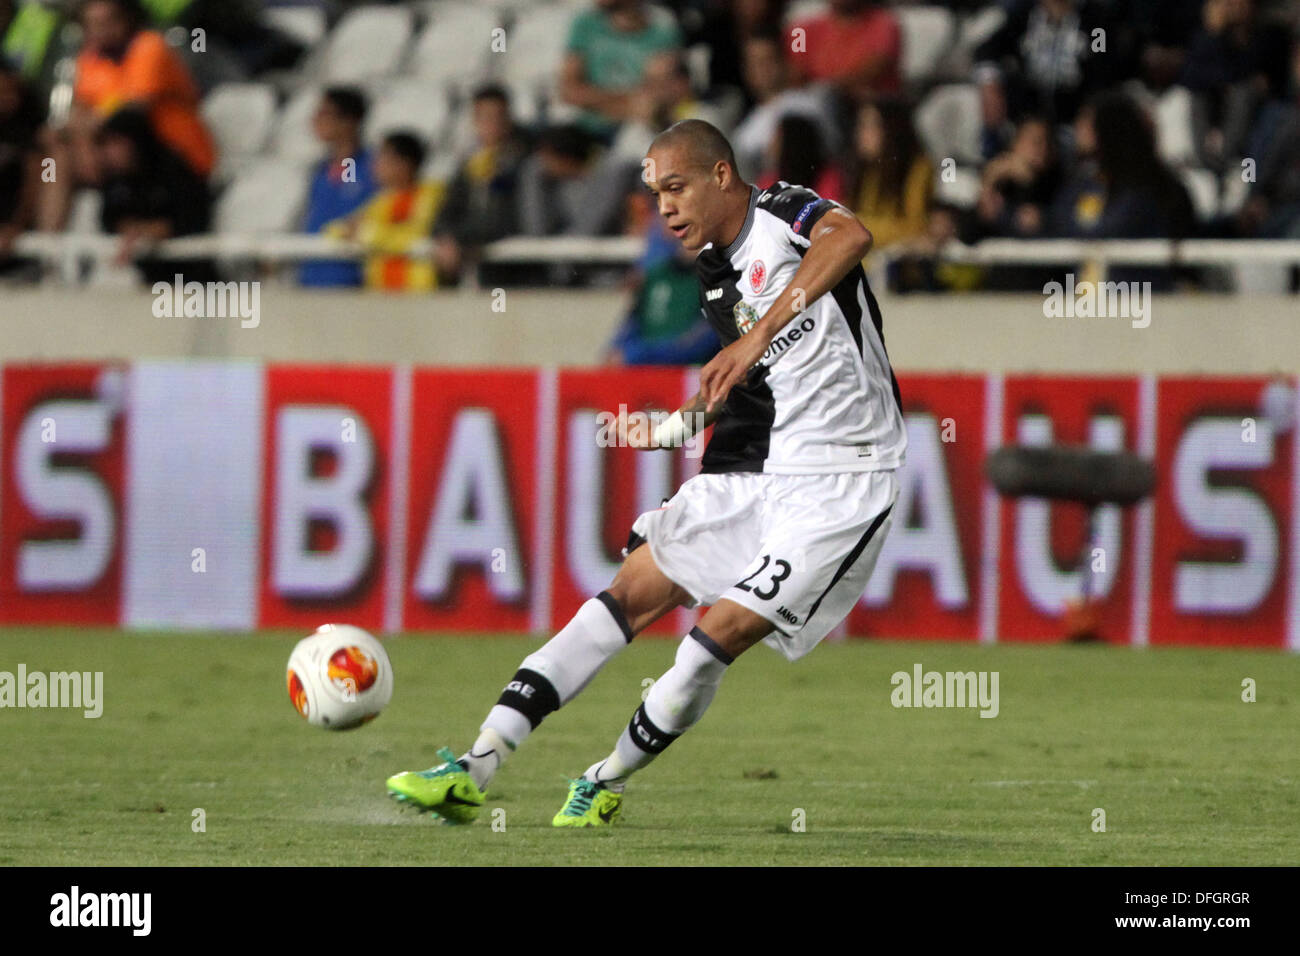 Nicosia, Cyprus. 03rd Oct, 2013. Eintracht Frankfurt's Anderson Bamba  during thei Europa League group F soccer match against Apoel at GSP stadium in Nicosia, Cyprus, Thursday, Oct. 3, 2013. © Yiannis Kourtoglou/Alamy Live News Stock Photo